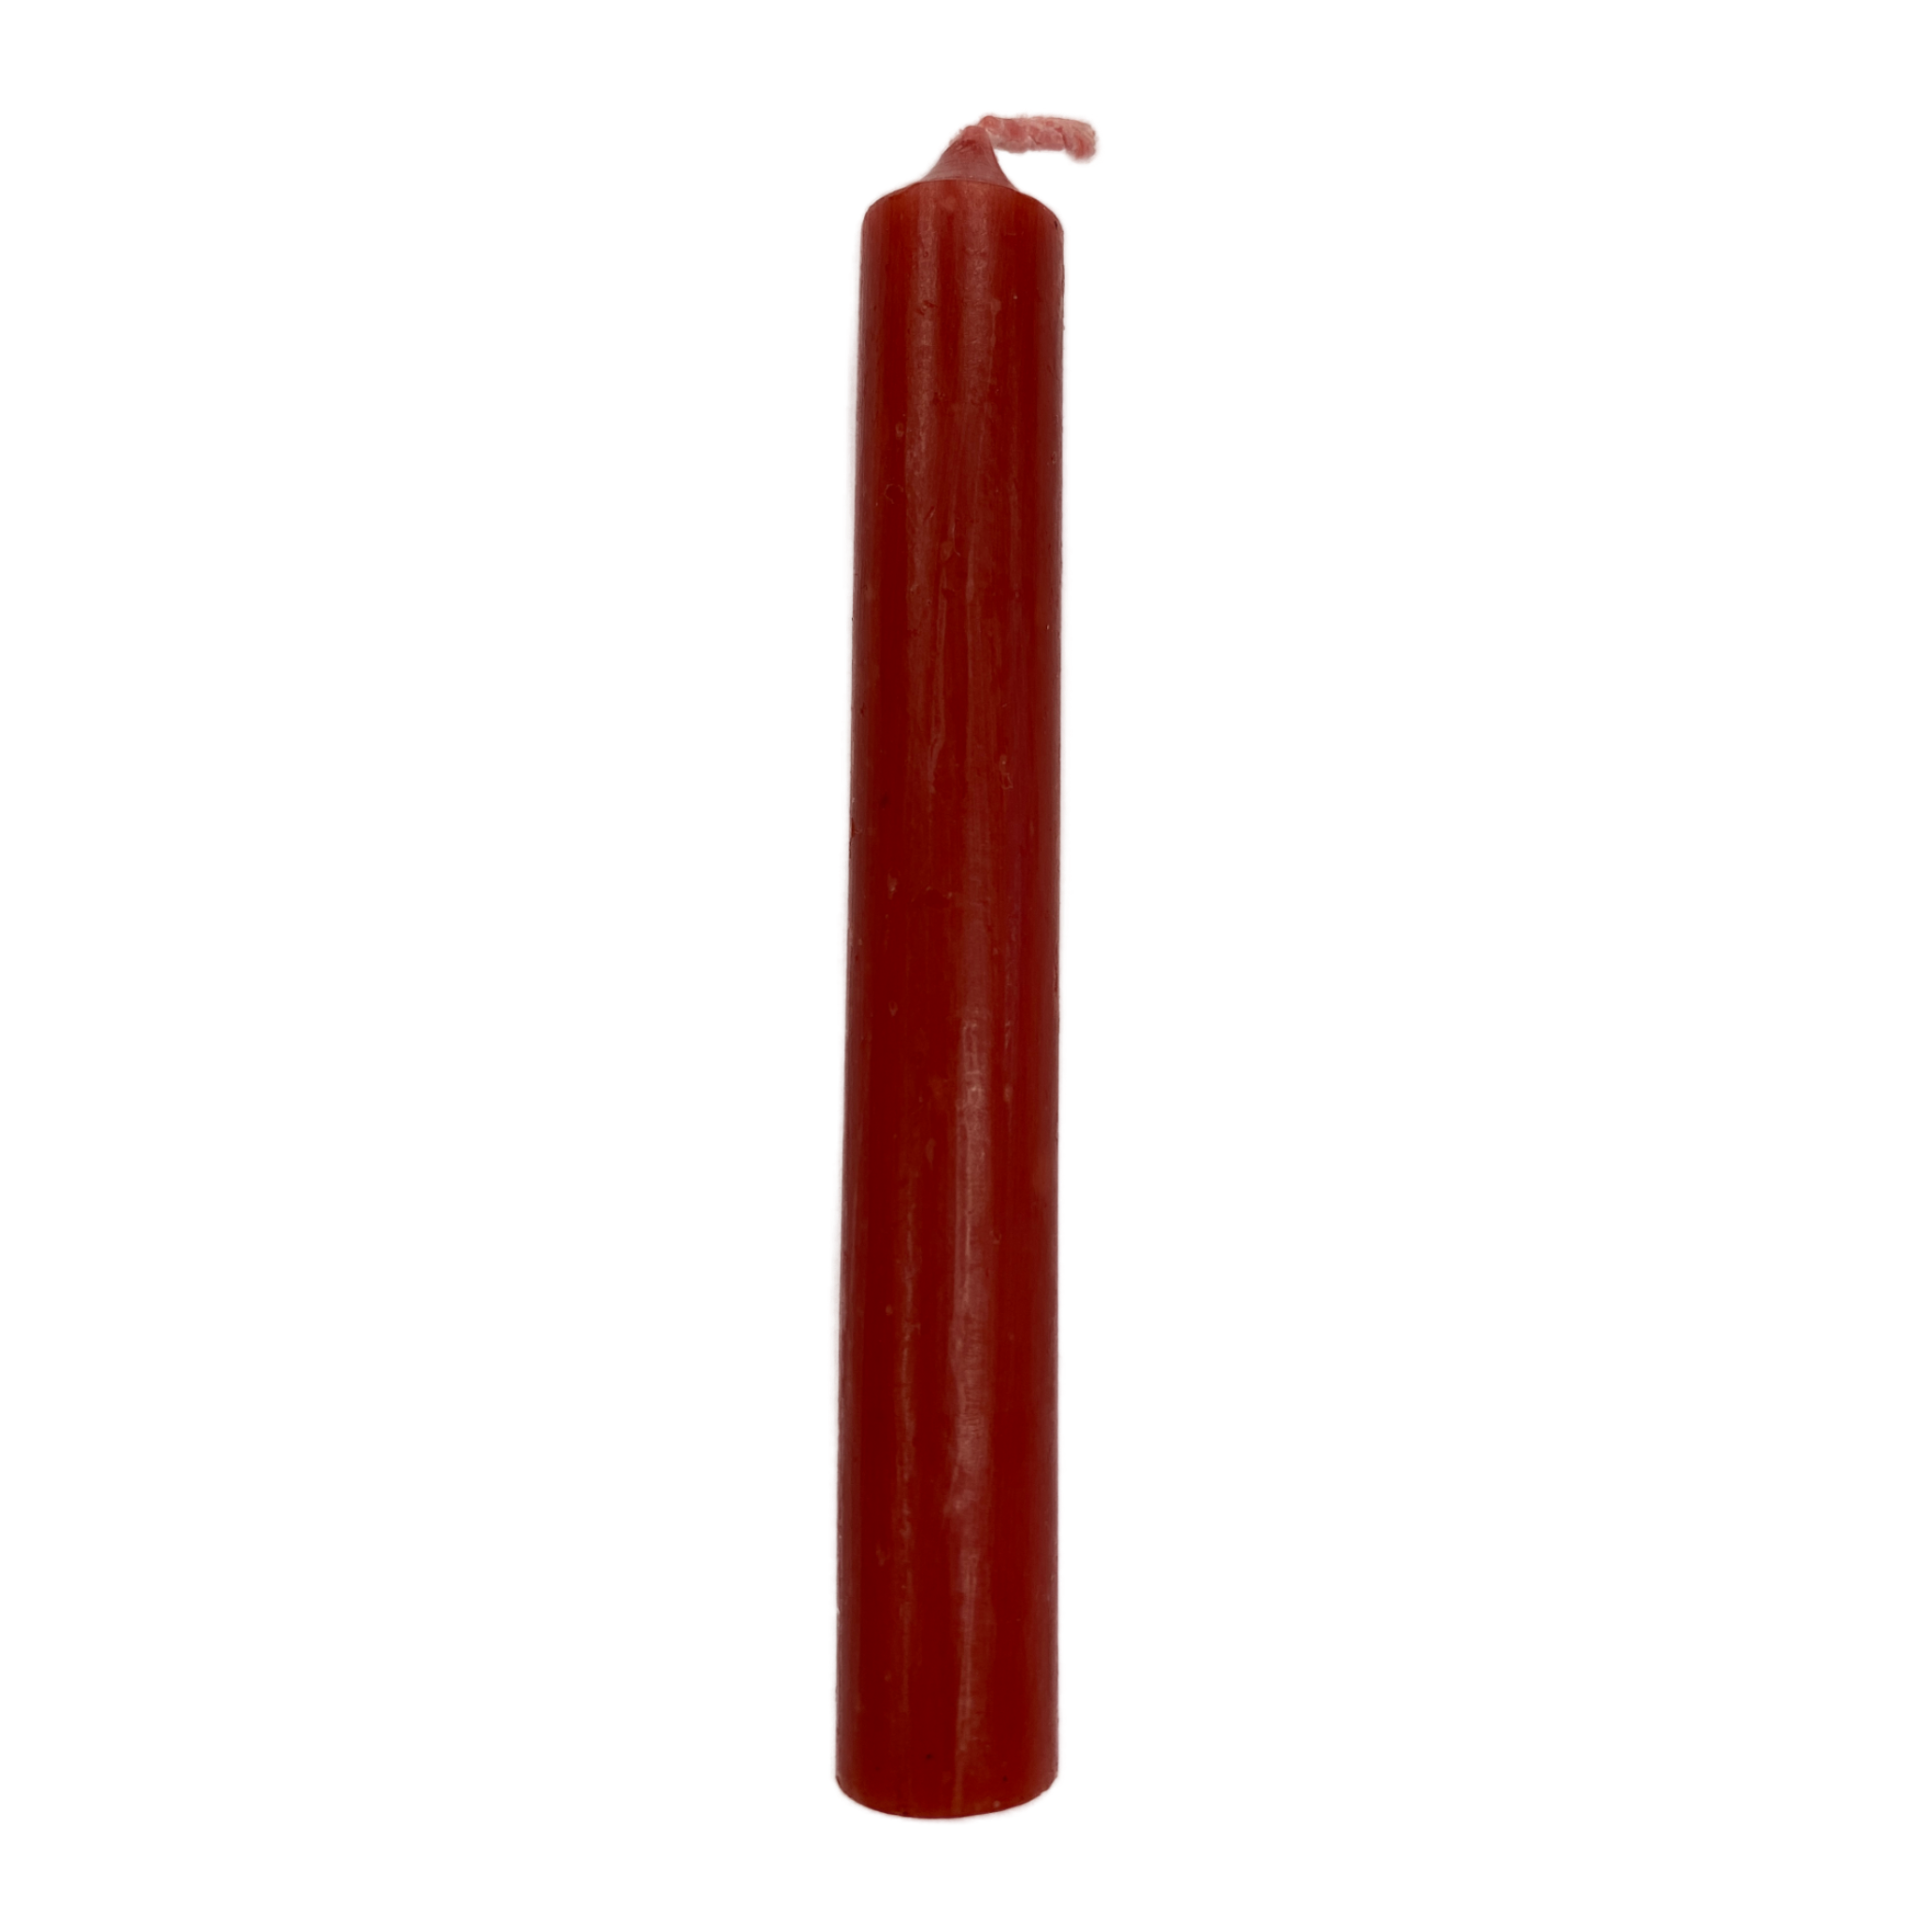 3" red candle 